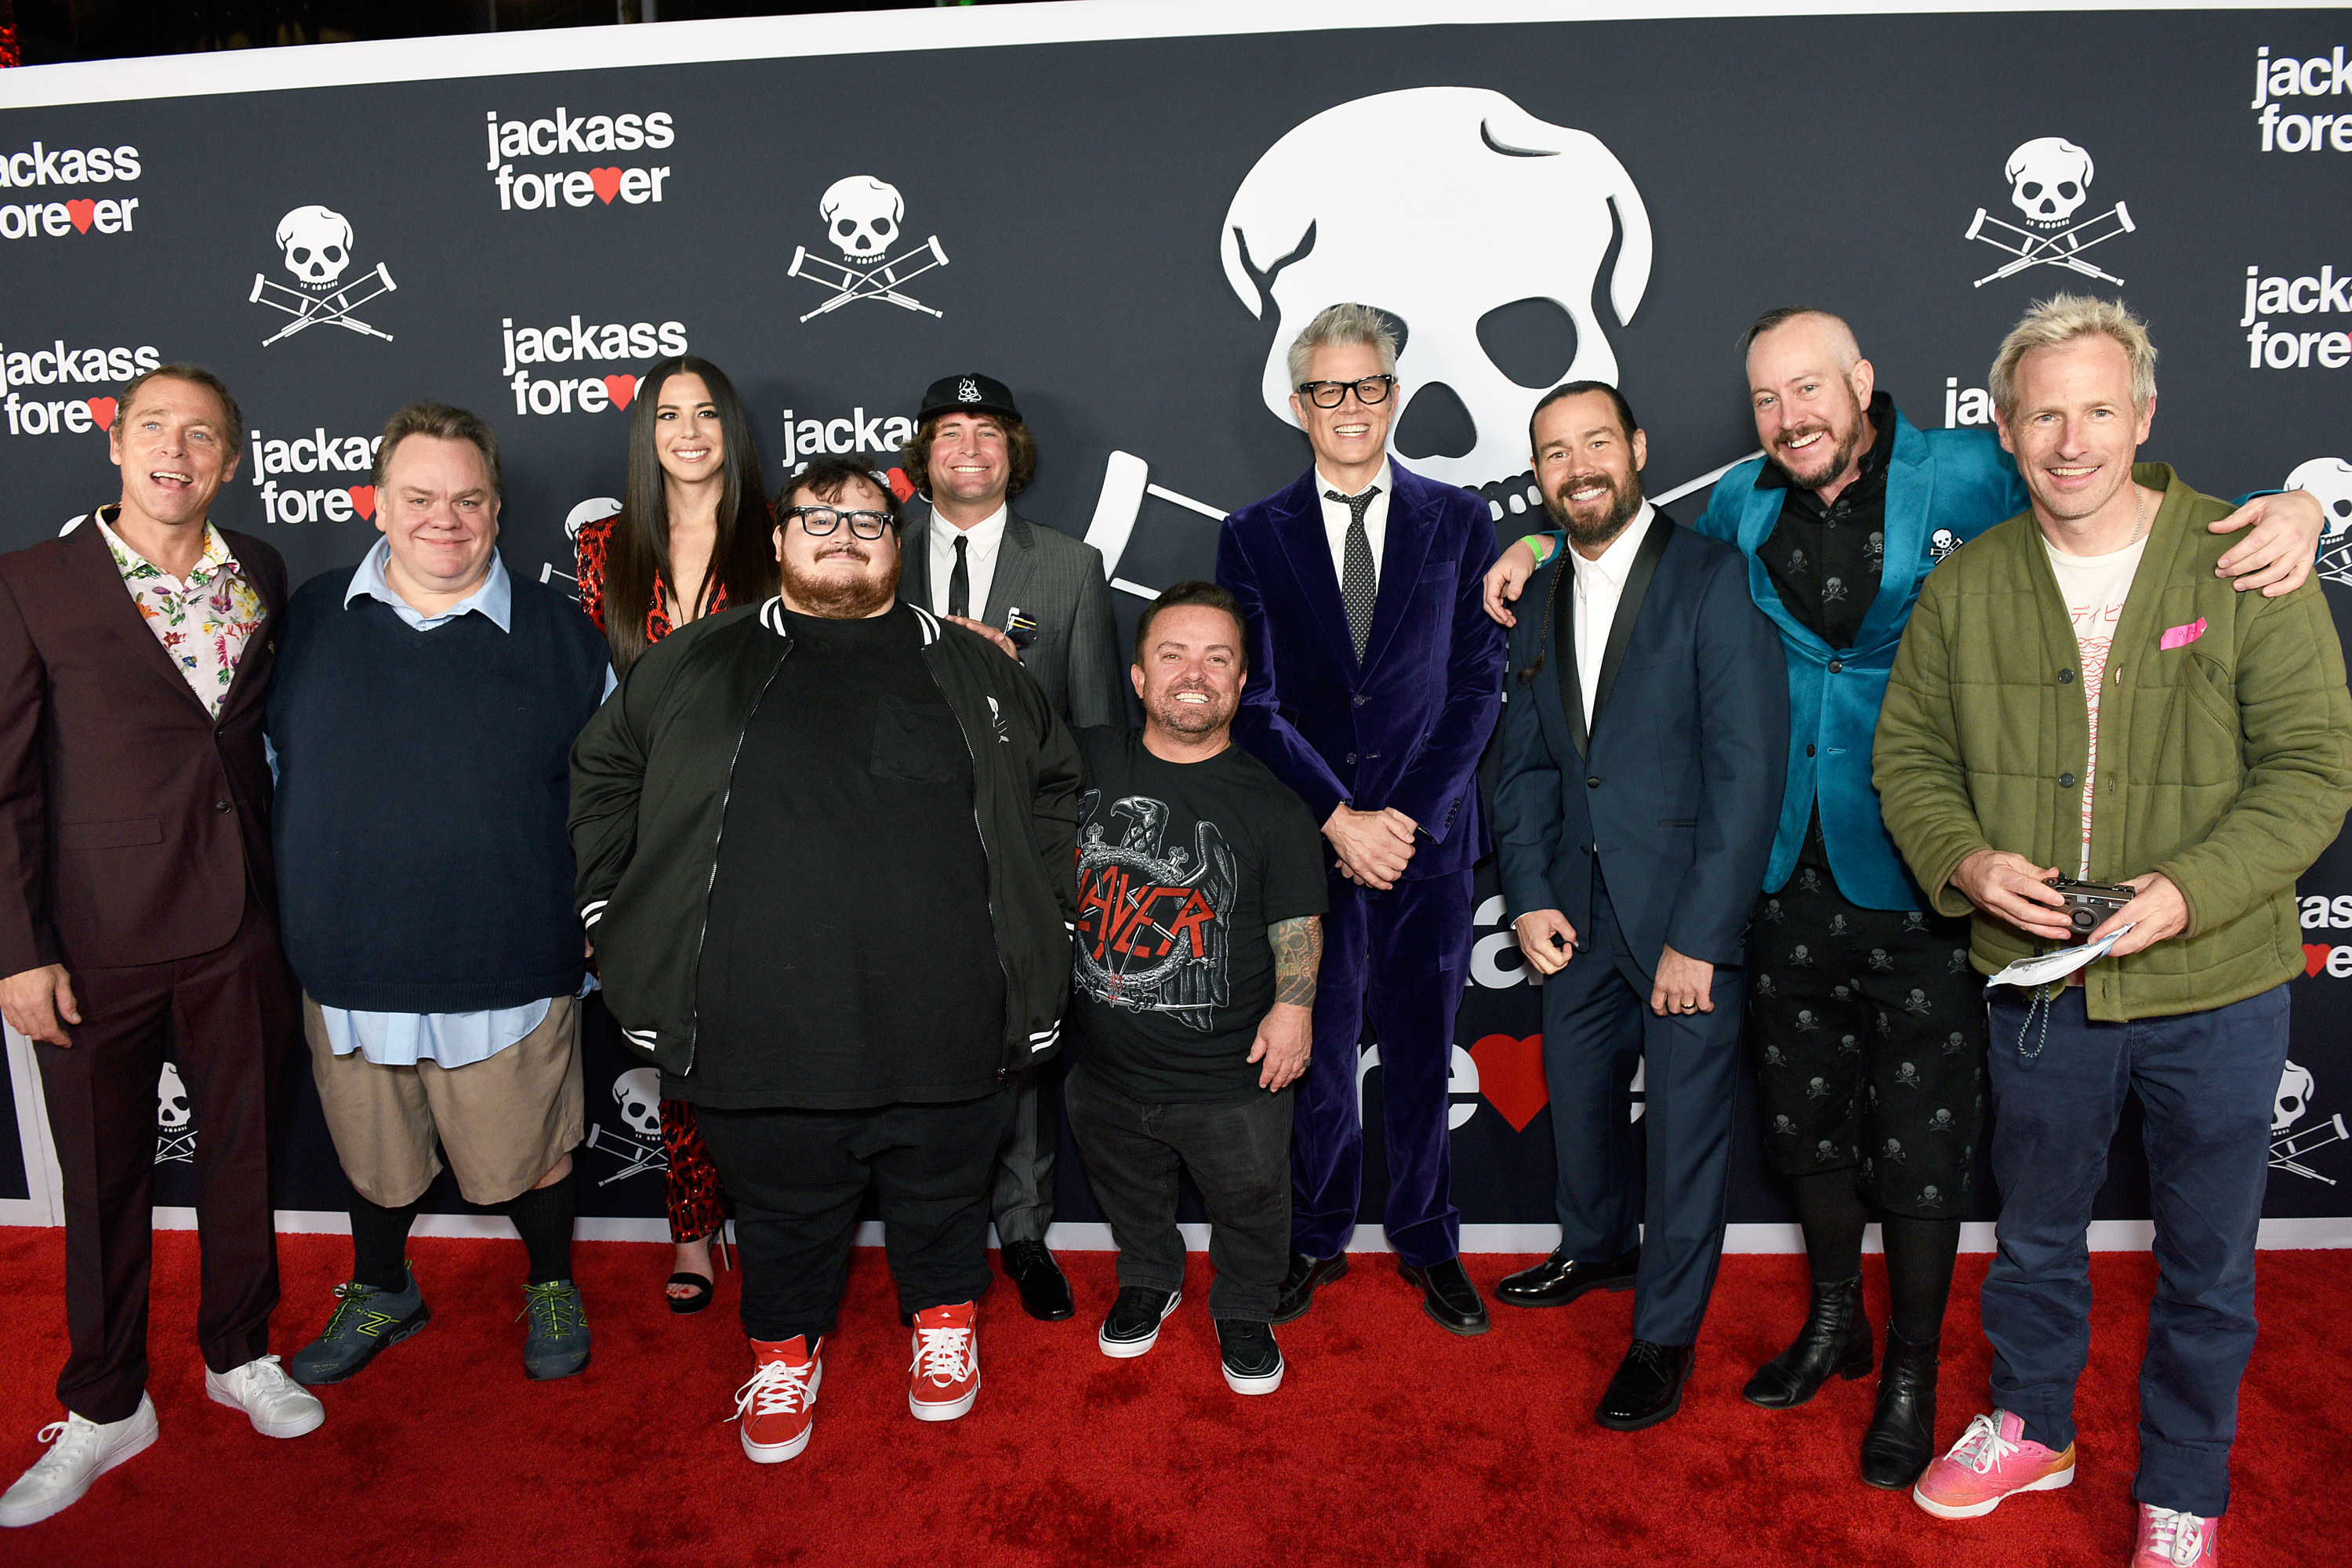 the group at jackass forever